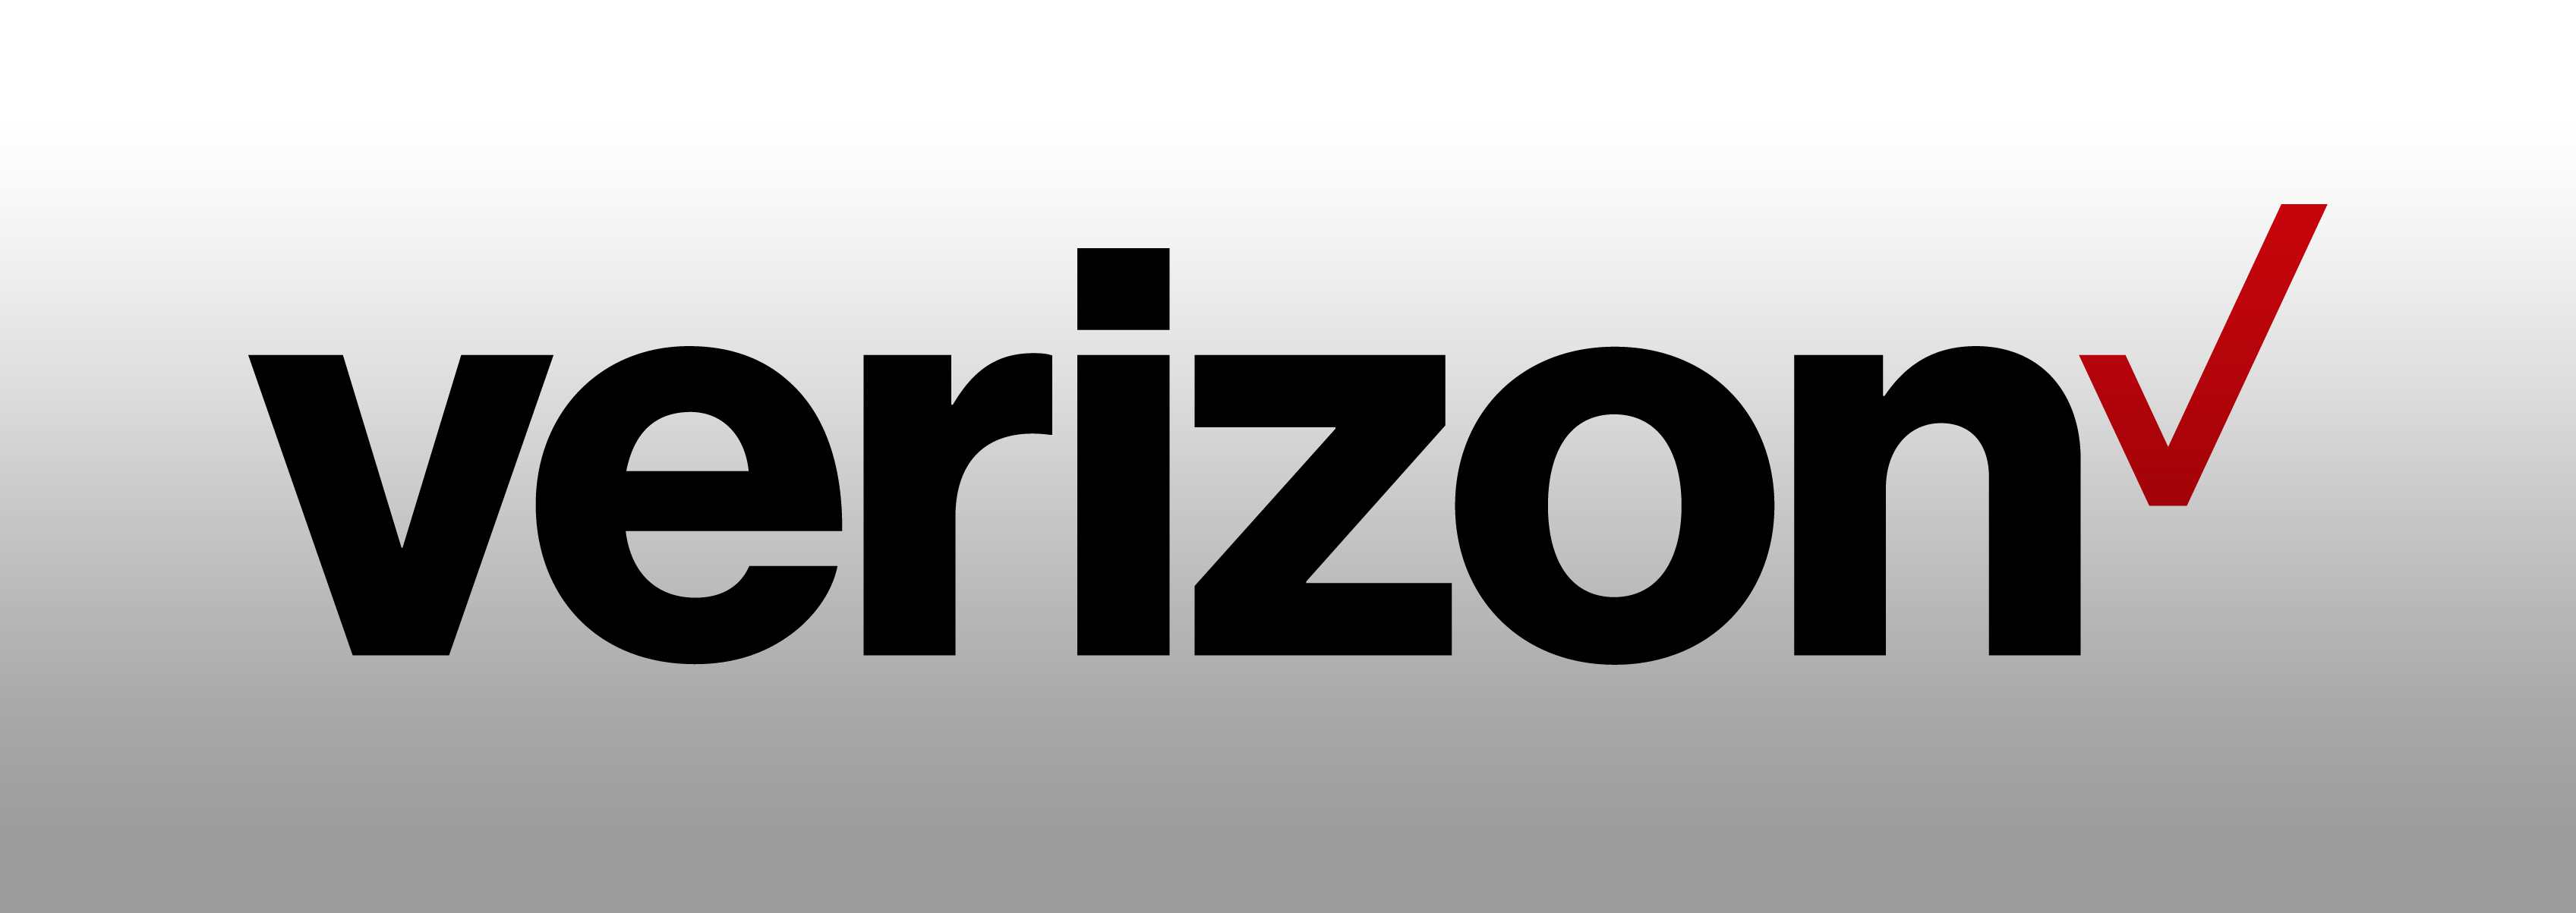 Customer Records For Millions Of Verizon Subscribers Exposed